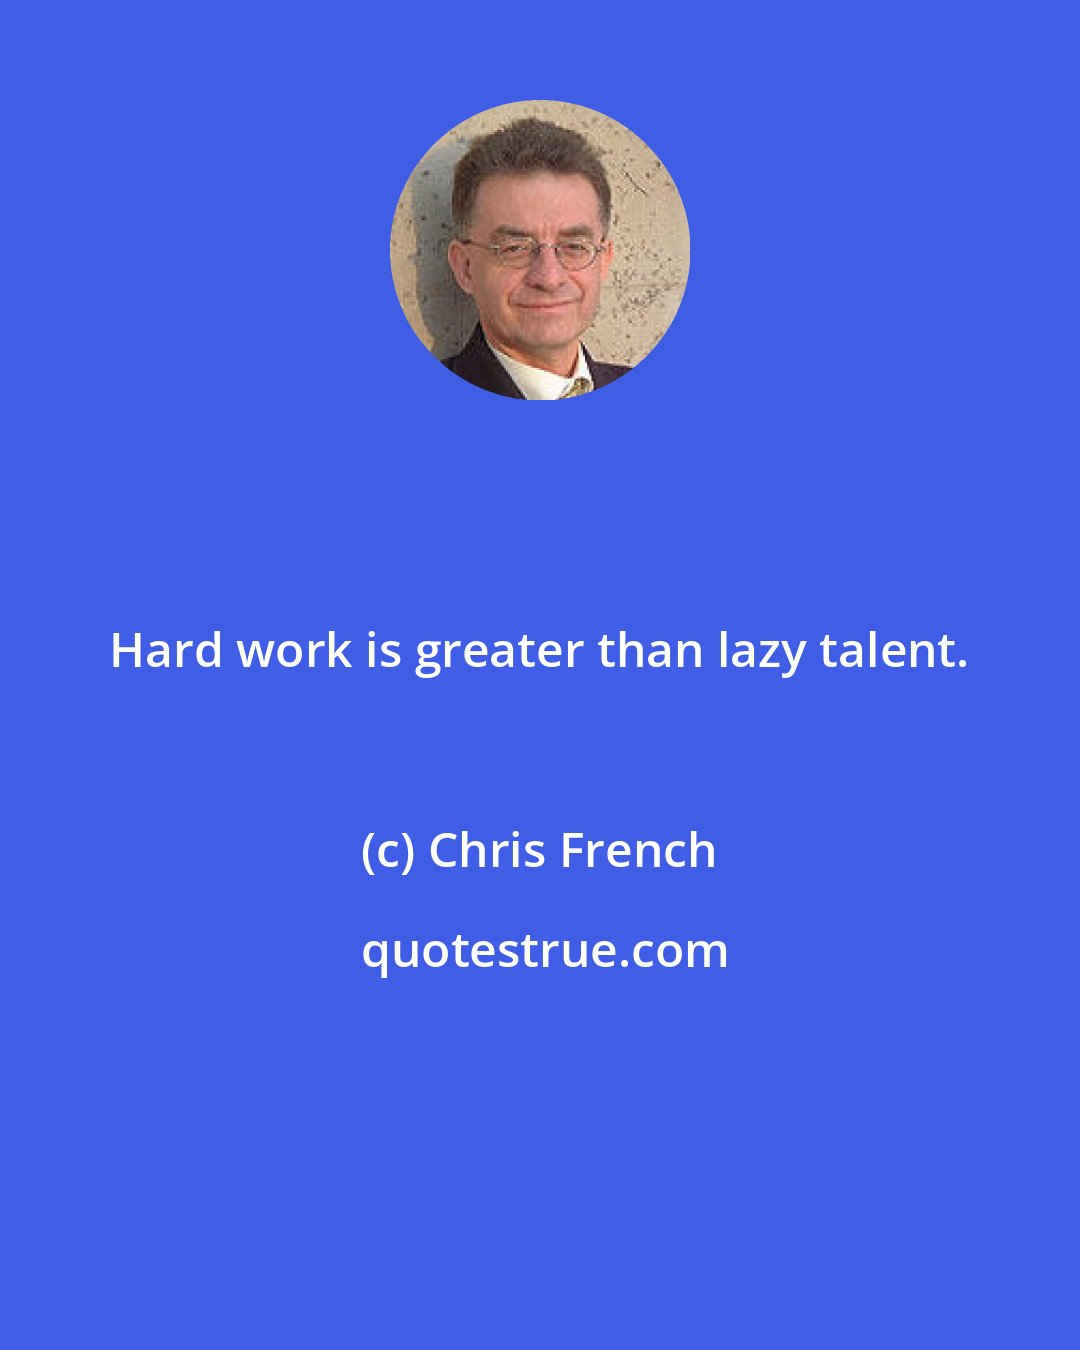 Chris French: Hard work is greater than lazy talent.